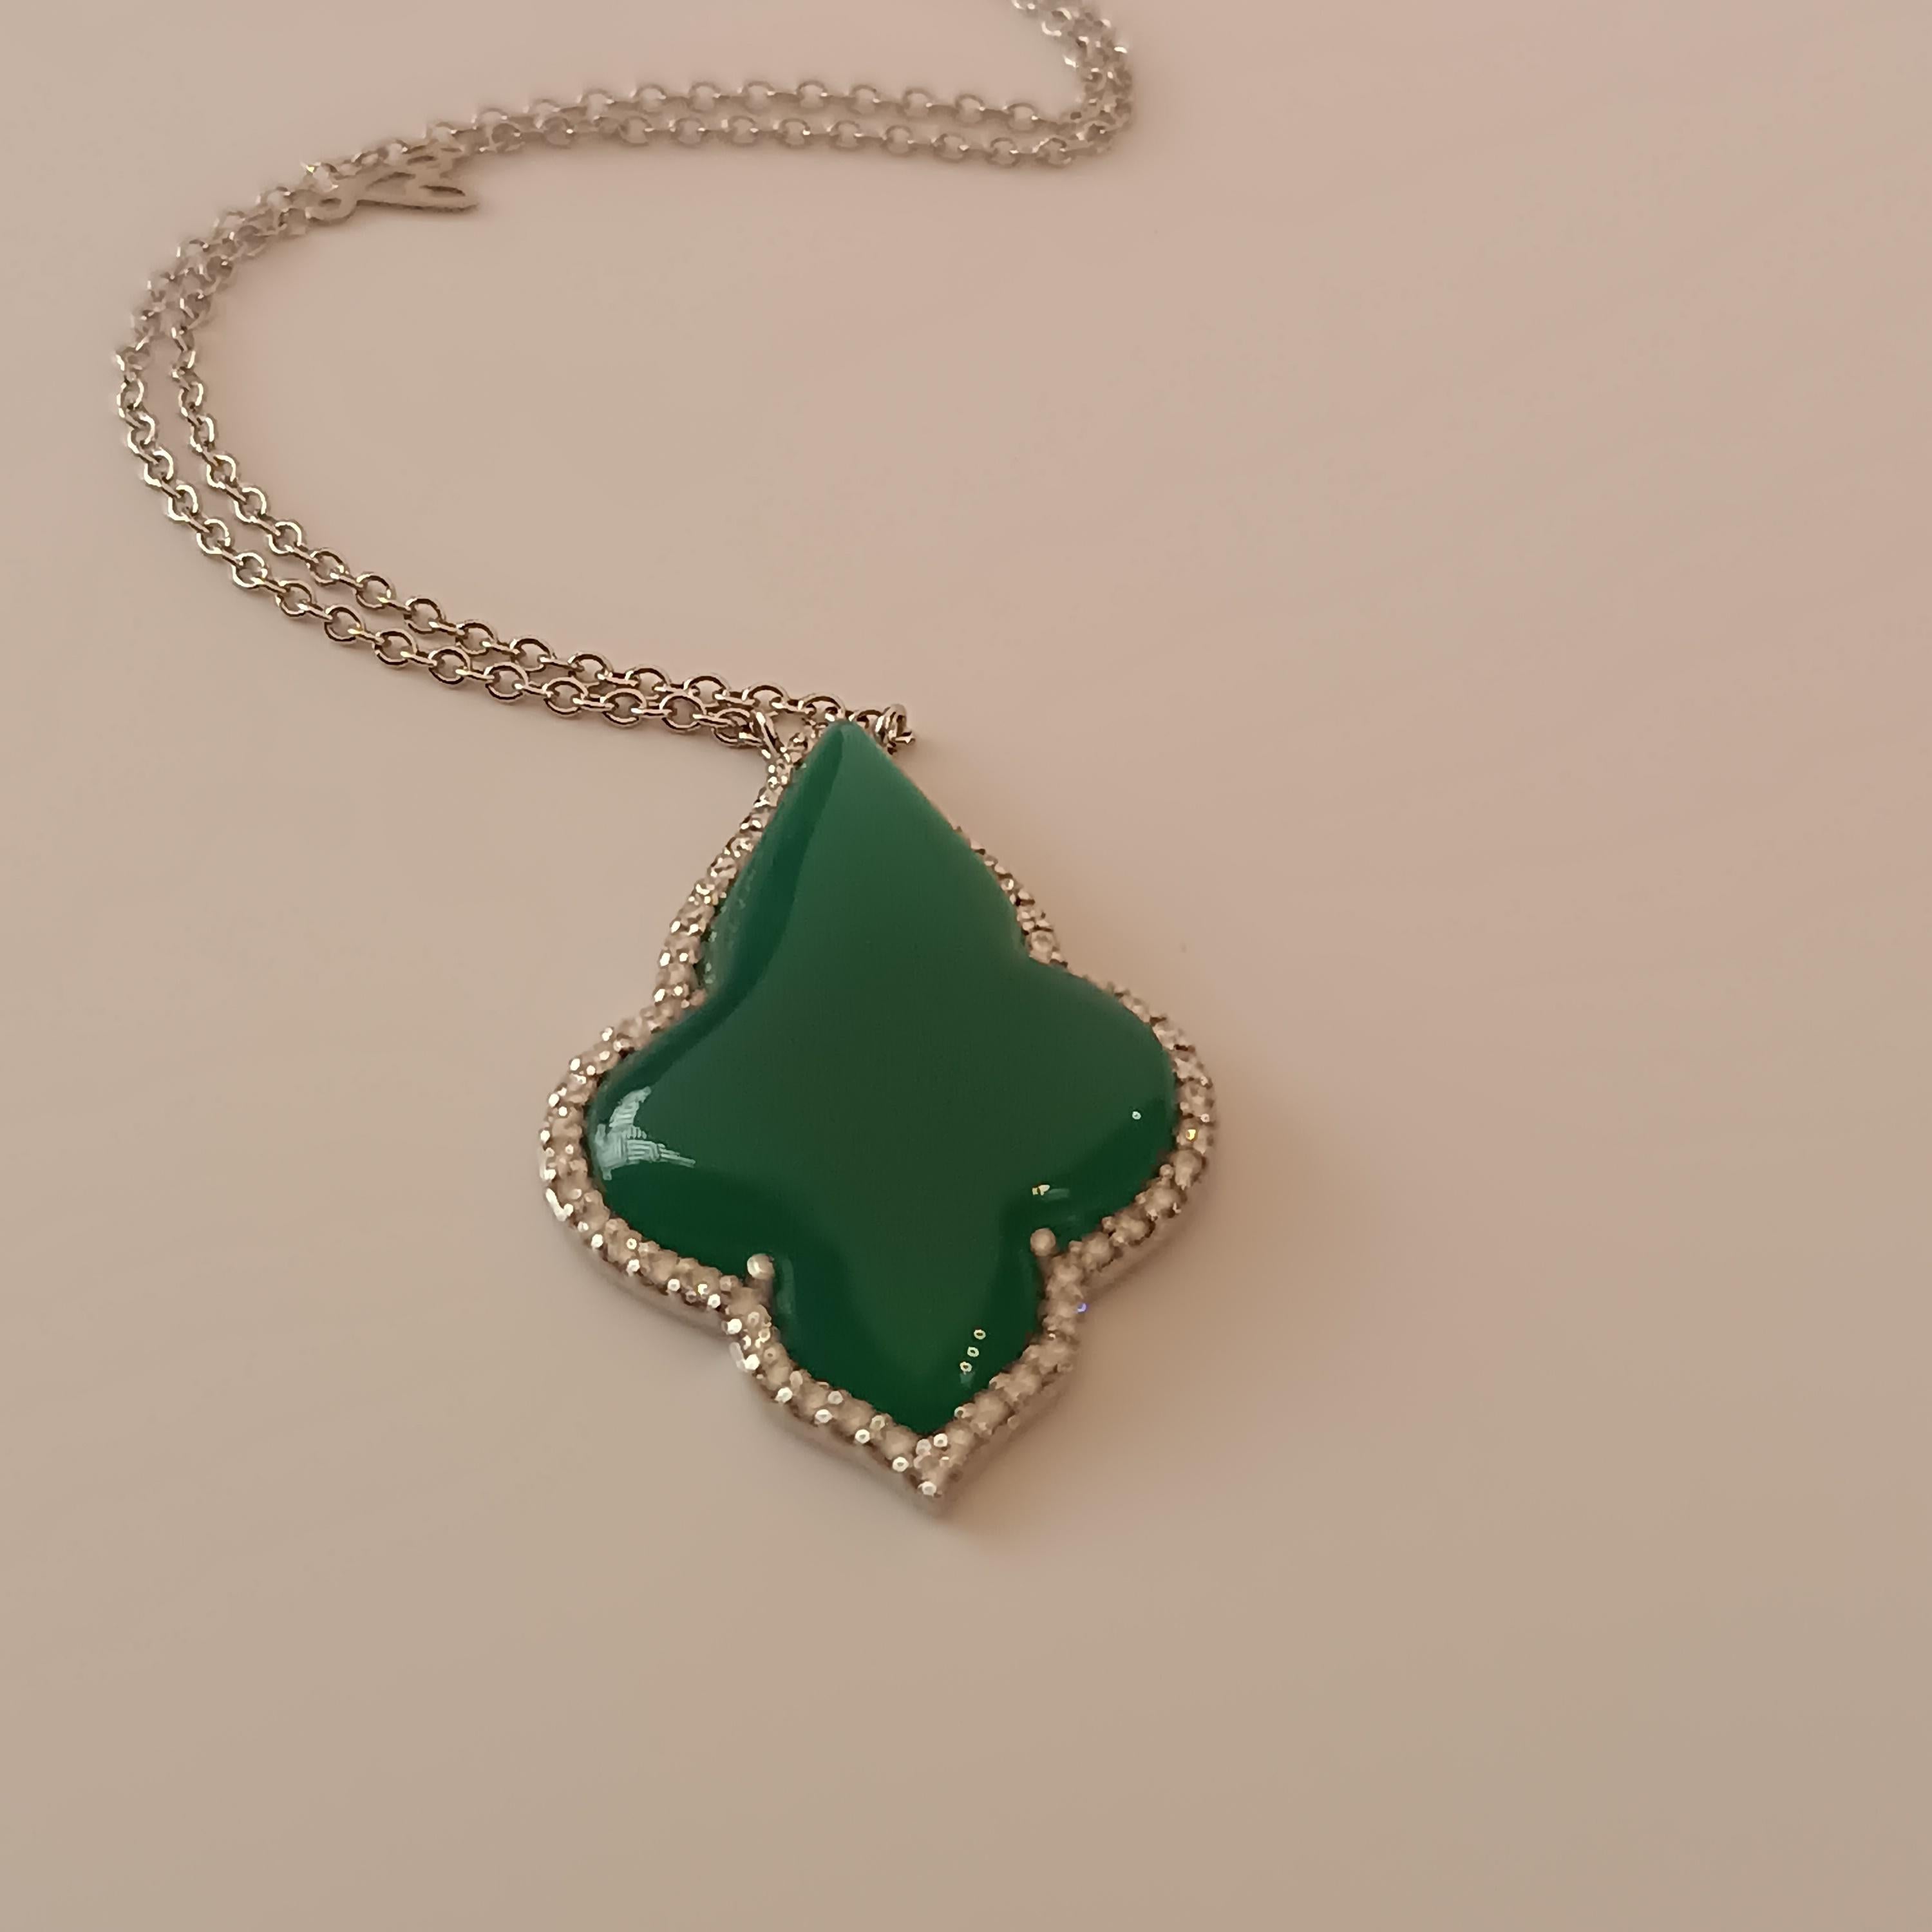 This wonderful Leo Milano pendant from our Carrobbio collection shows in every detail a very complicate yet perfectly done workmanship. The pendant and the chain are in 18 carat white gold with green agate . The object weights 8.16 grams the total